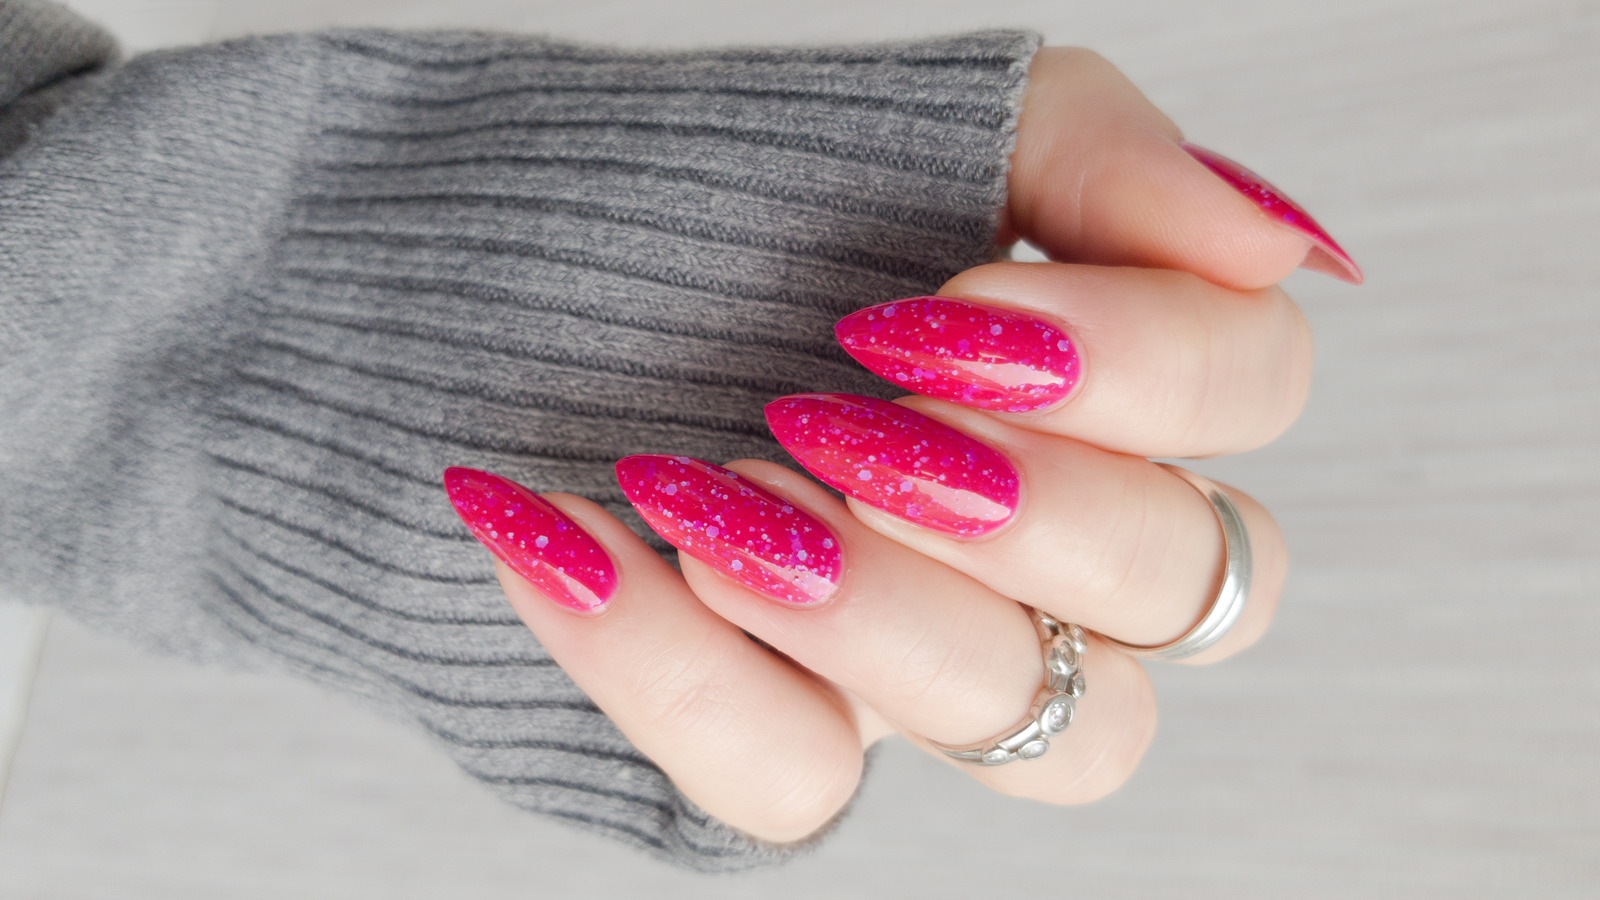 Why You Should Think Twice Before Getting Acrylic Nails